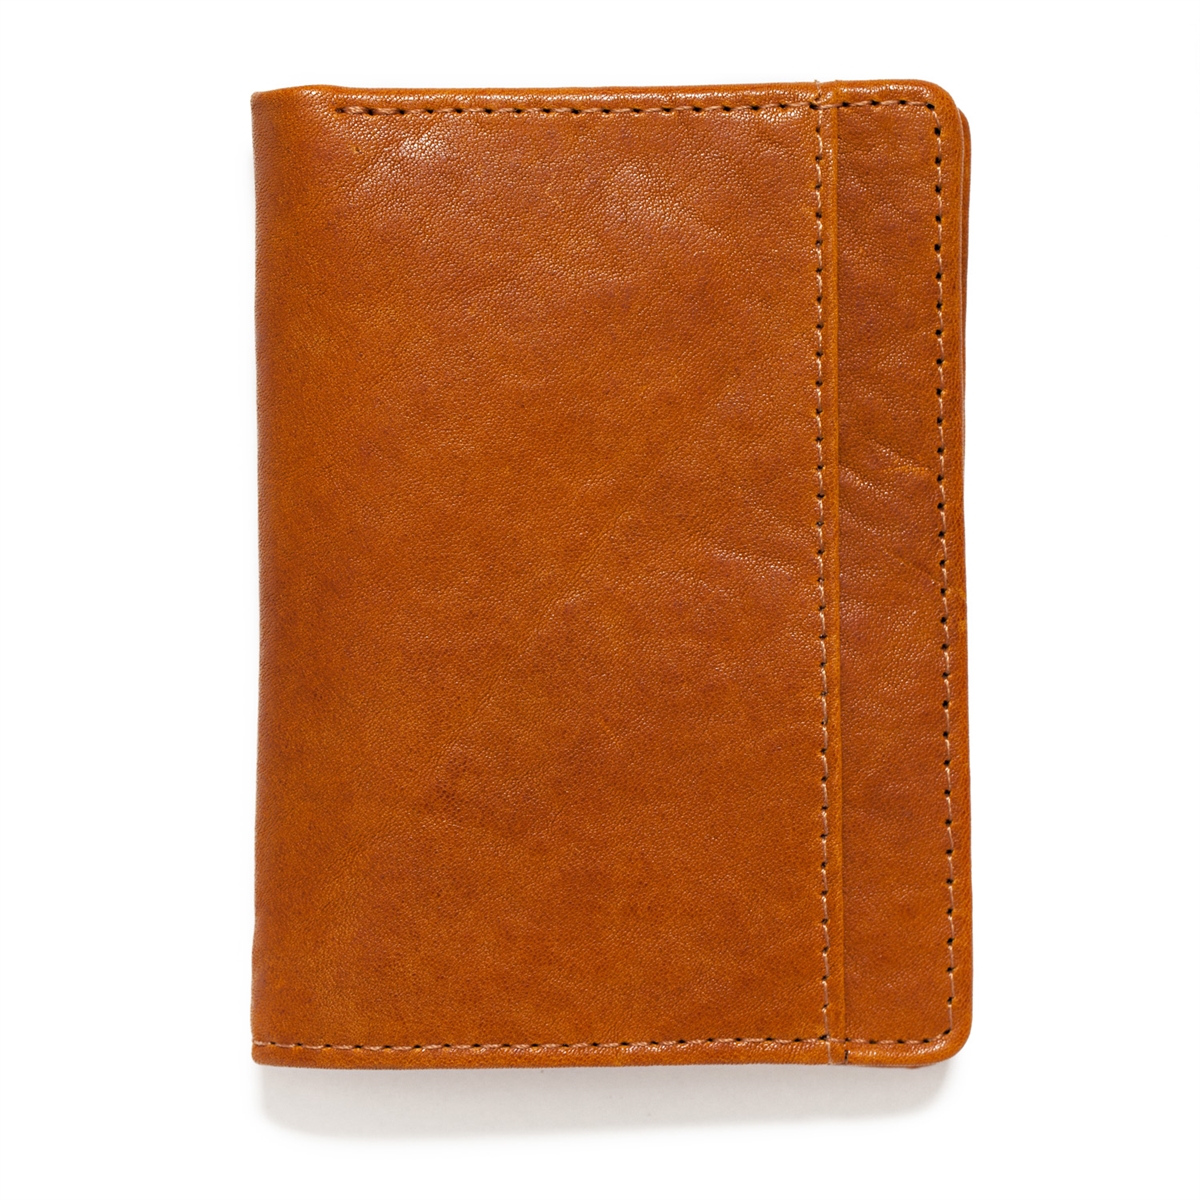 Ole Miss Genuine Leather Fossil Wallet. : r/wallets